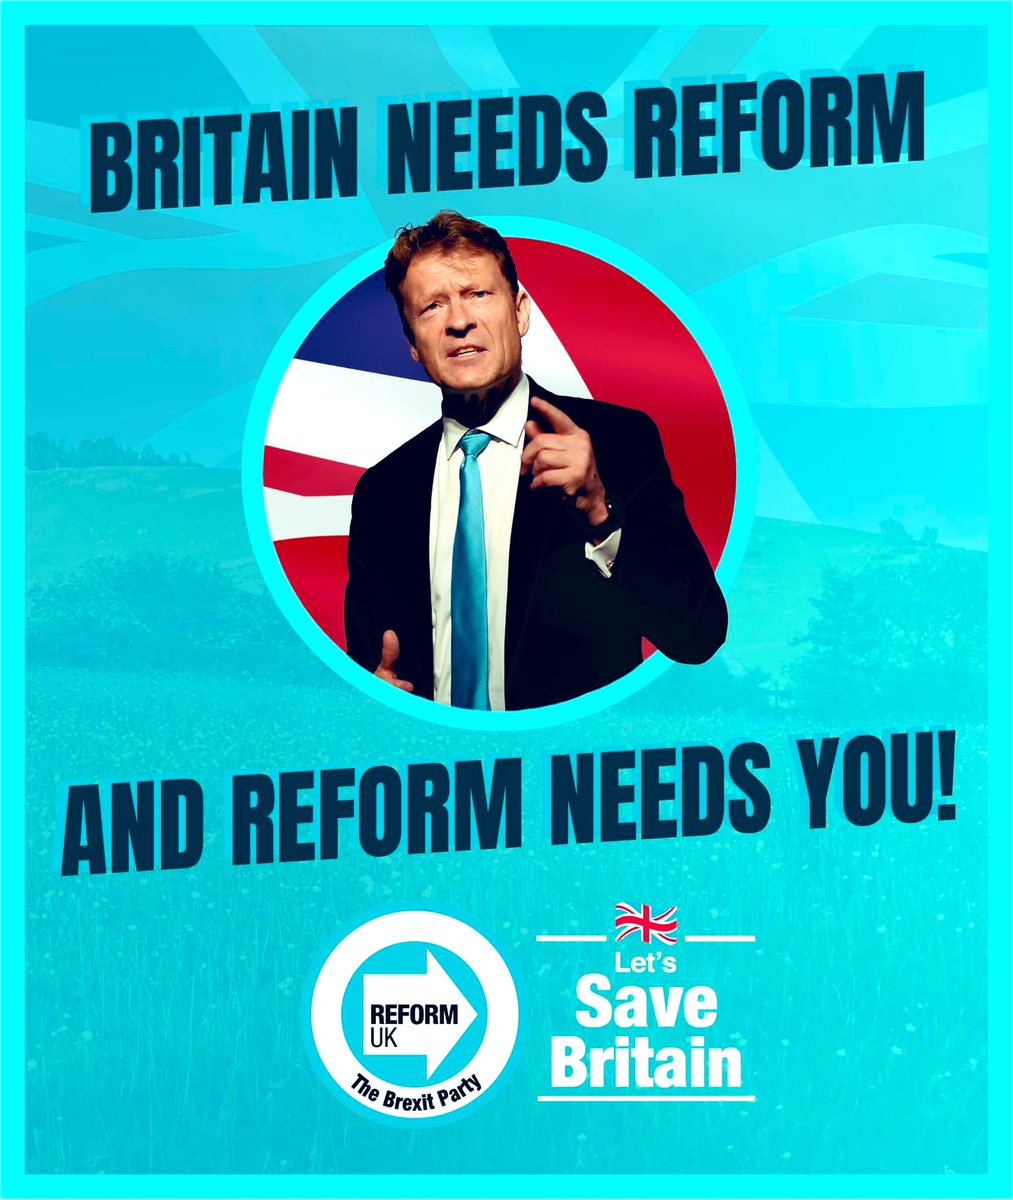 We really do need your votes. Just look back over recent history of a failed Tory government from 2009-2024 and the failed Labour government of 1997-2009. They both failed, lied and caused the issues we endure now. Britain needs a different approach, we need @reformparty_uk